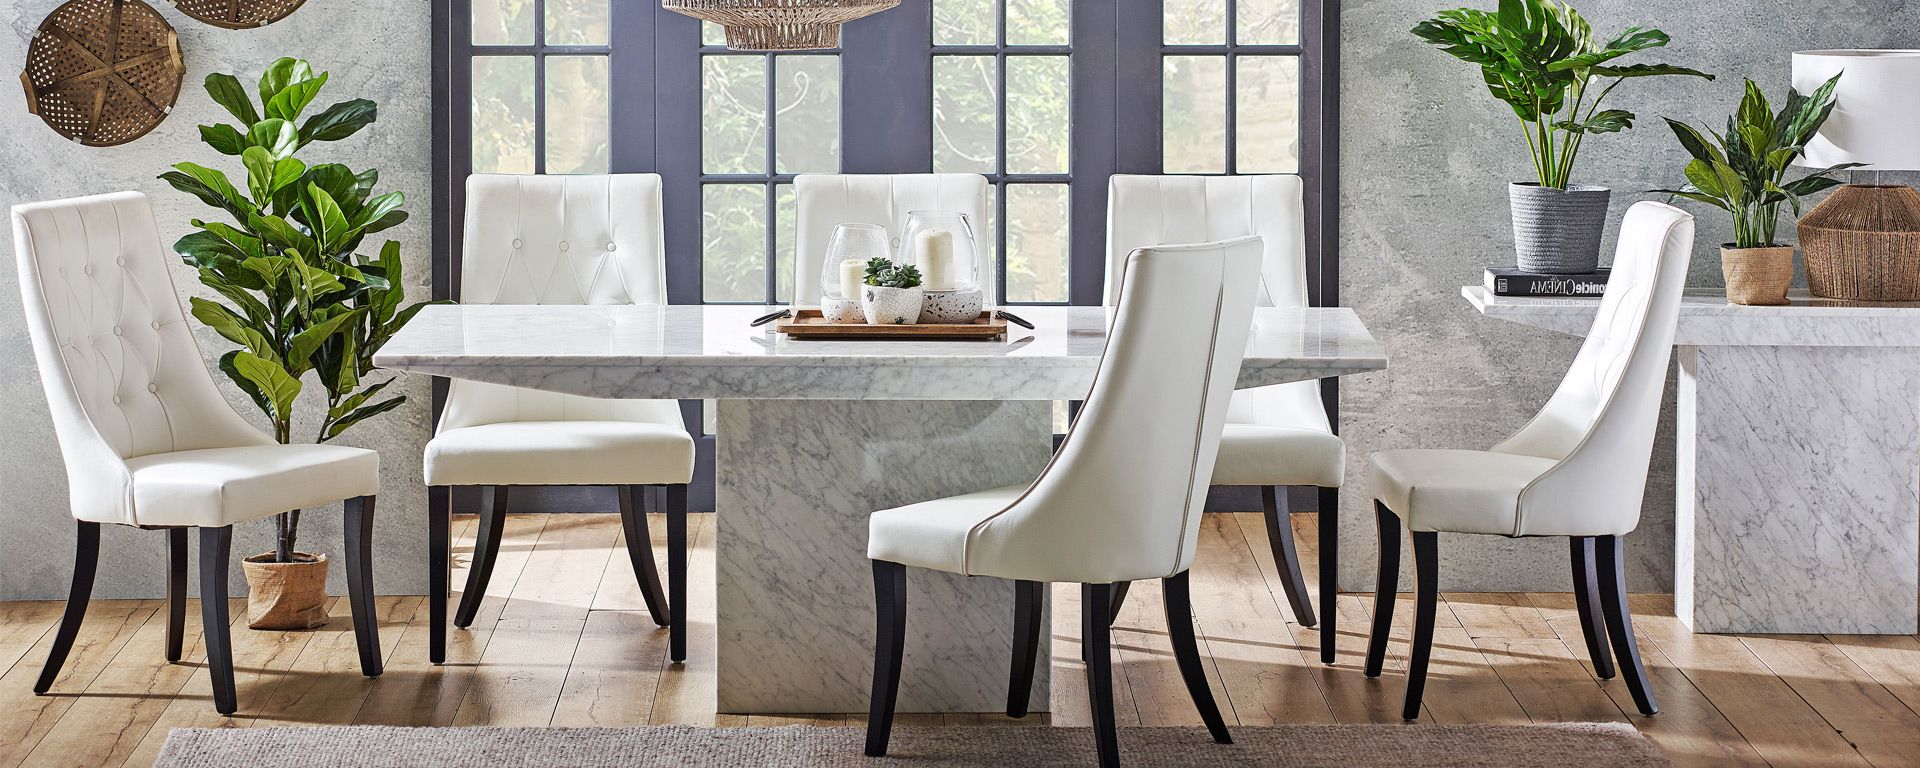 Dining Room Goals: 5 Trending Concrete And Stone Dining Intended For Industrial Concrete Like Buffets (View 18 of 20)